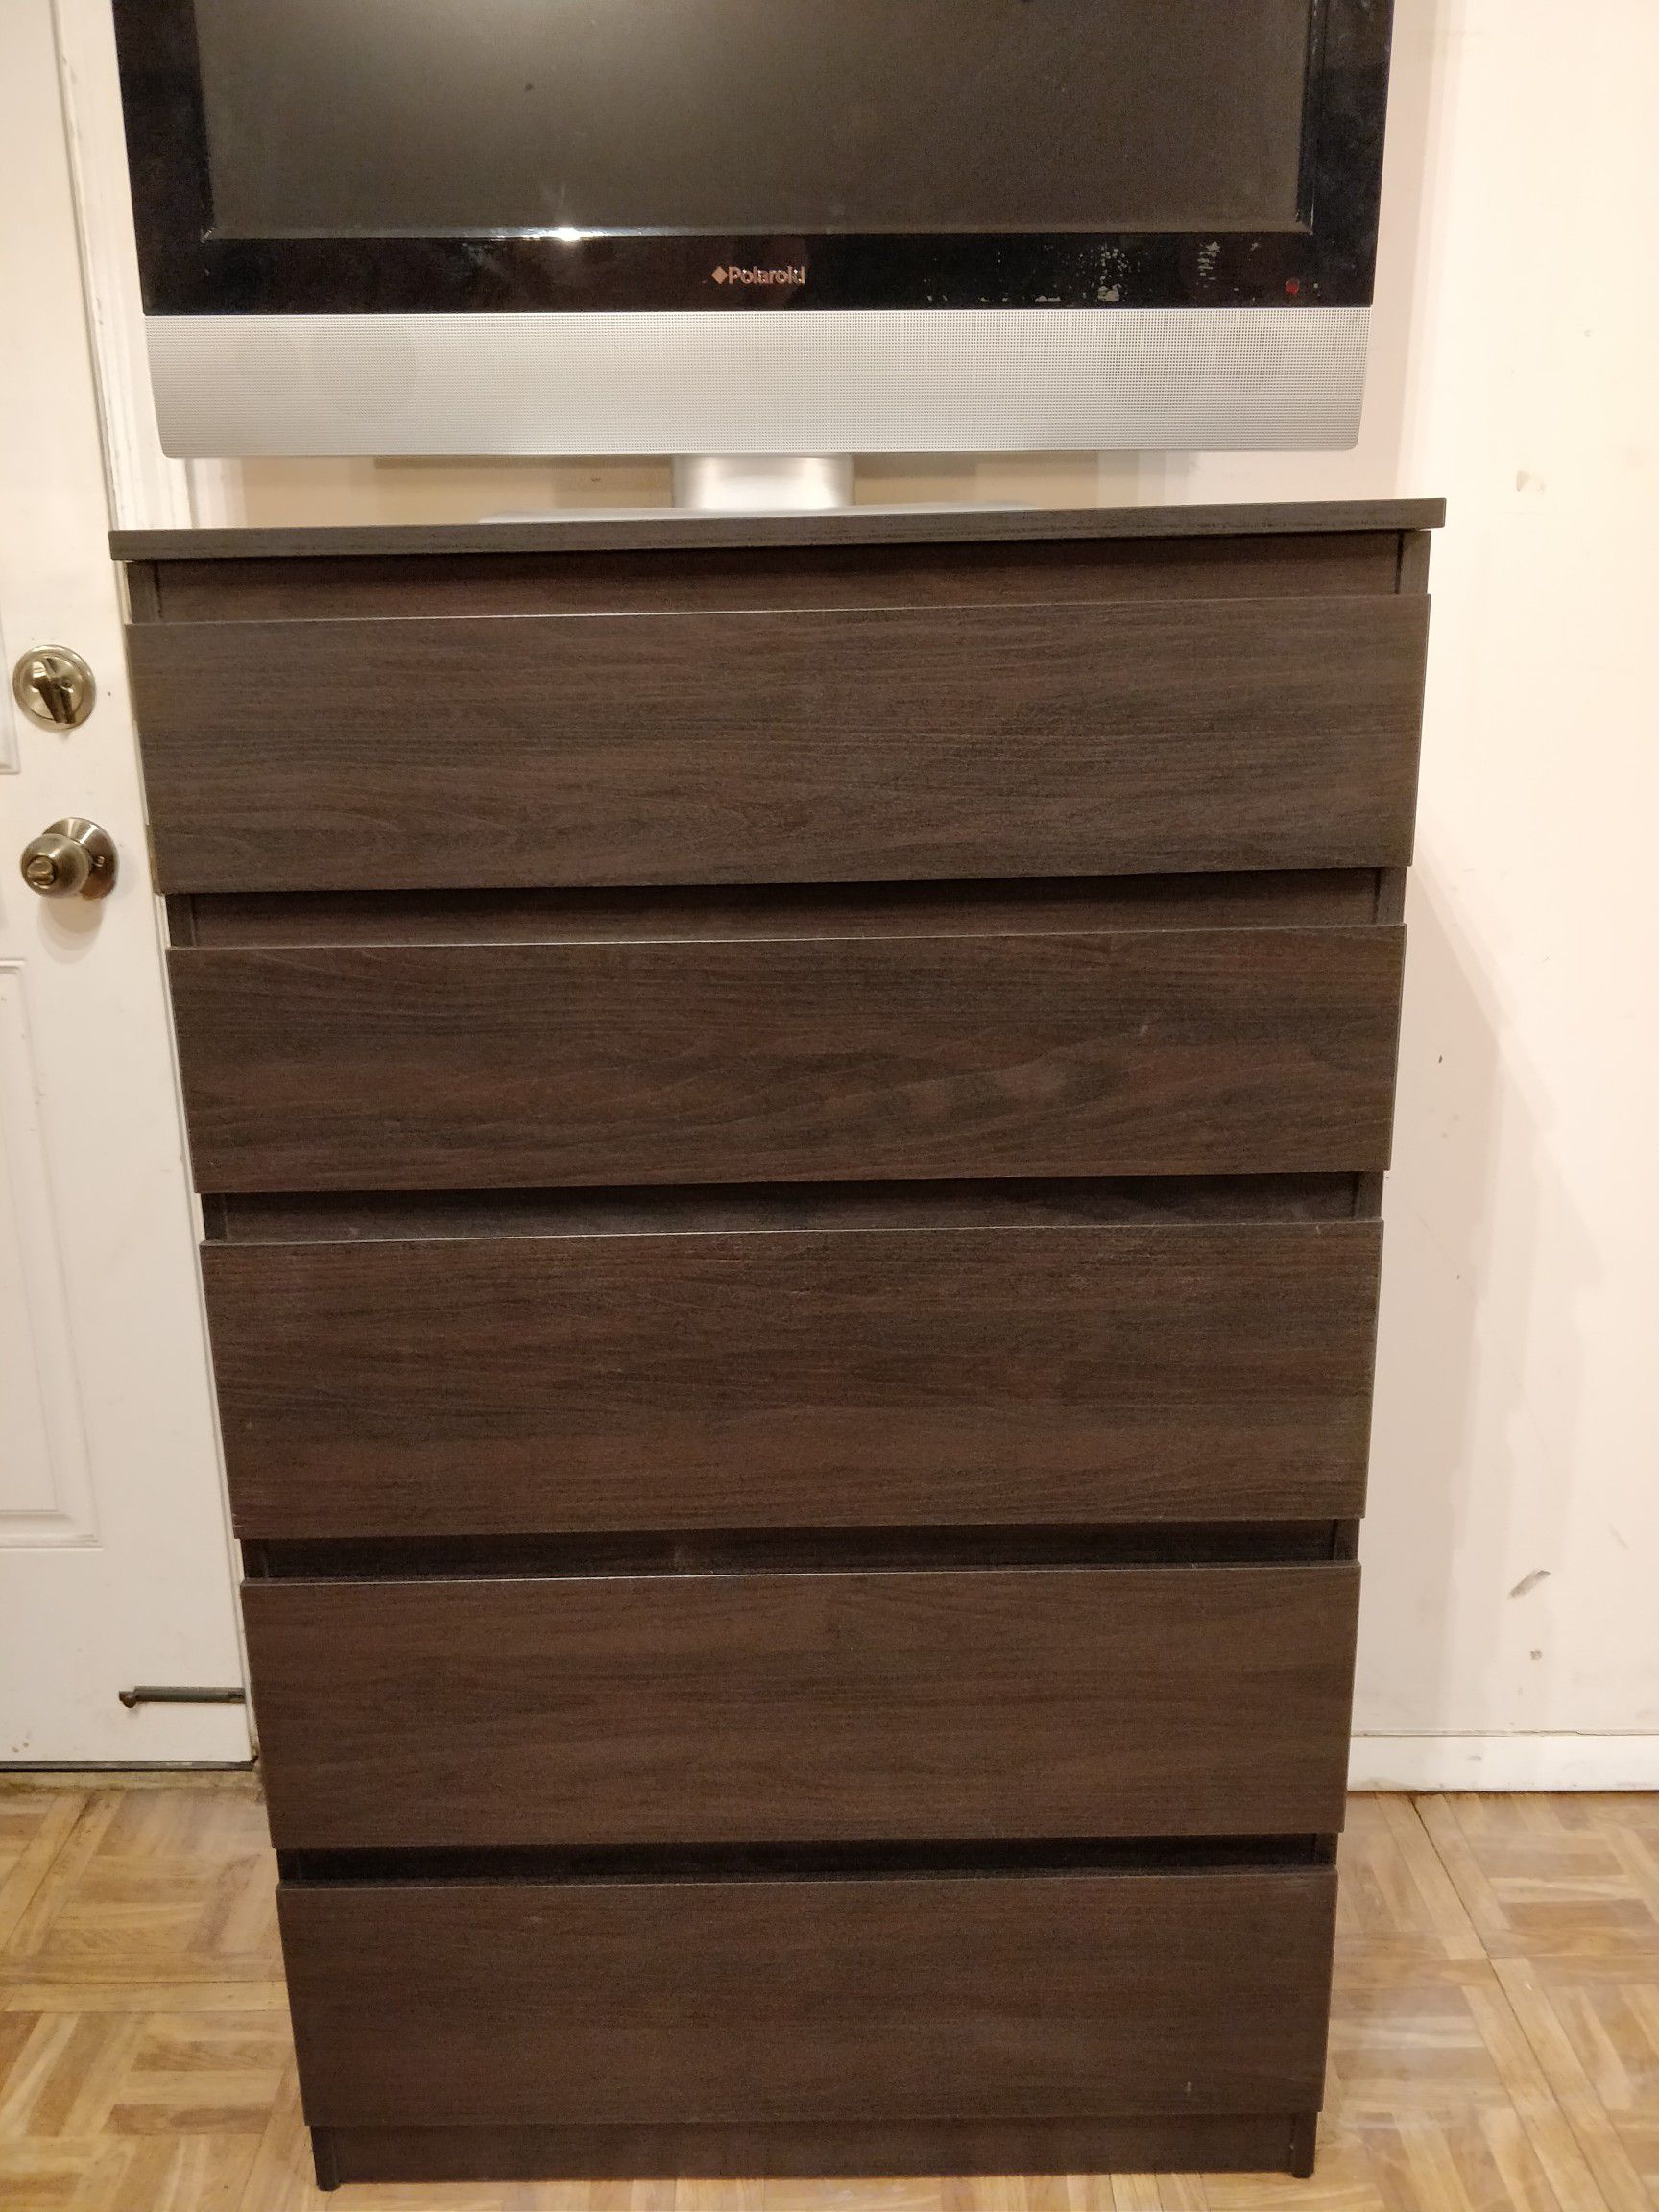 New chest dresser never used before, all drawers sliding smoothly, pet free smoke free.